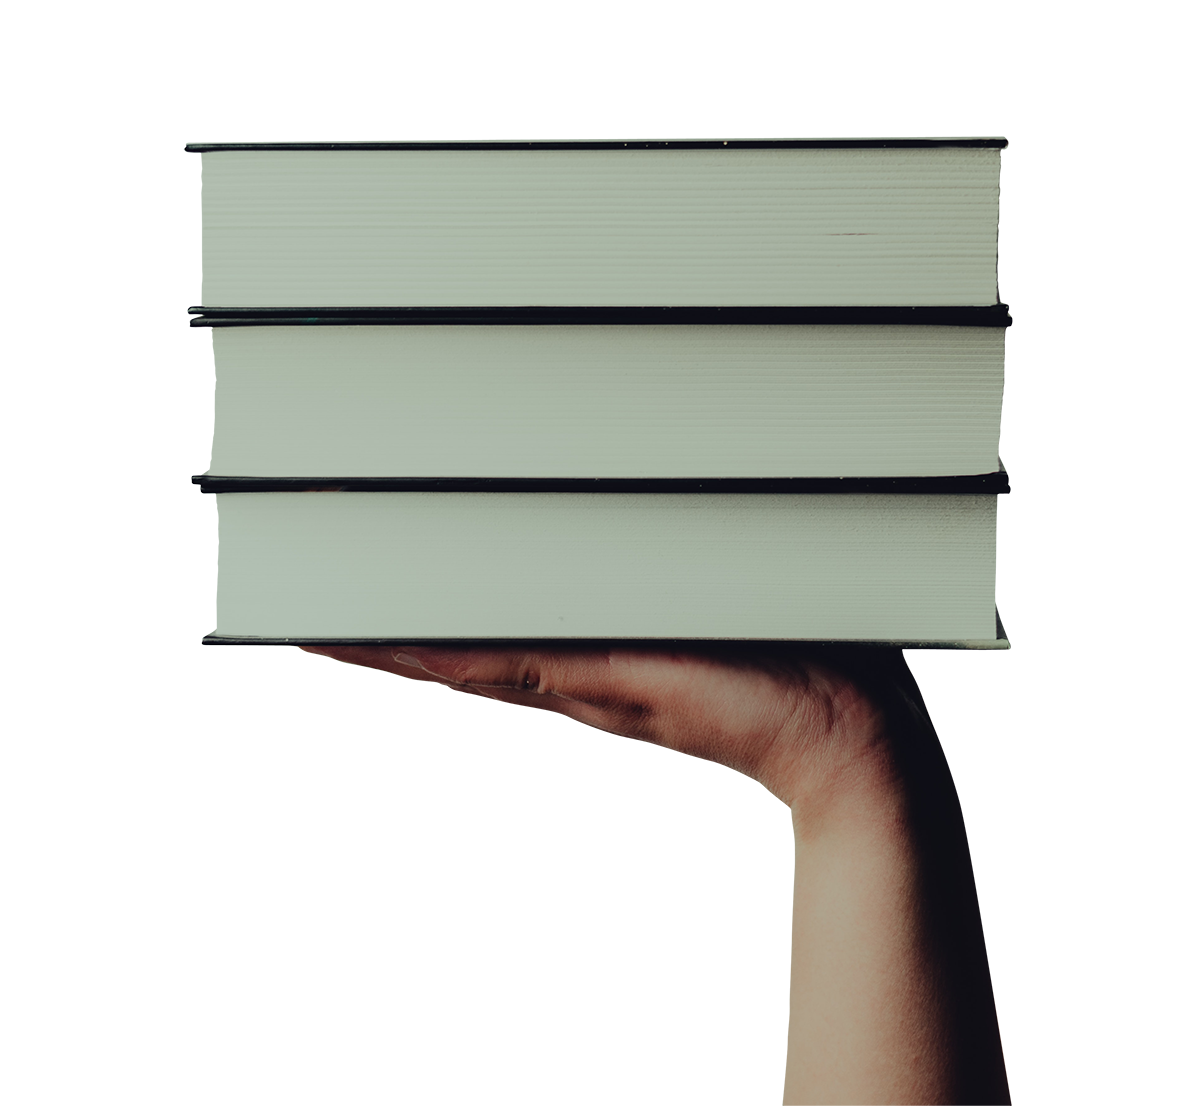 books on hand PNG image, transparent books on hand png, books on hand png hd images download